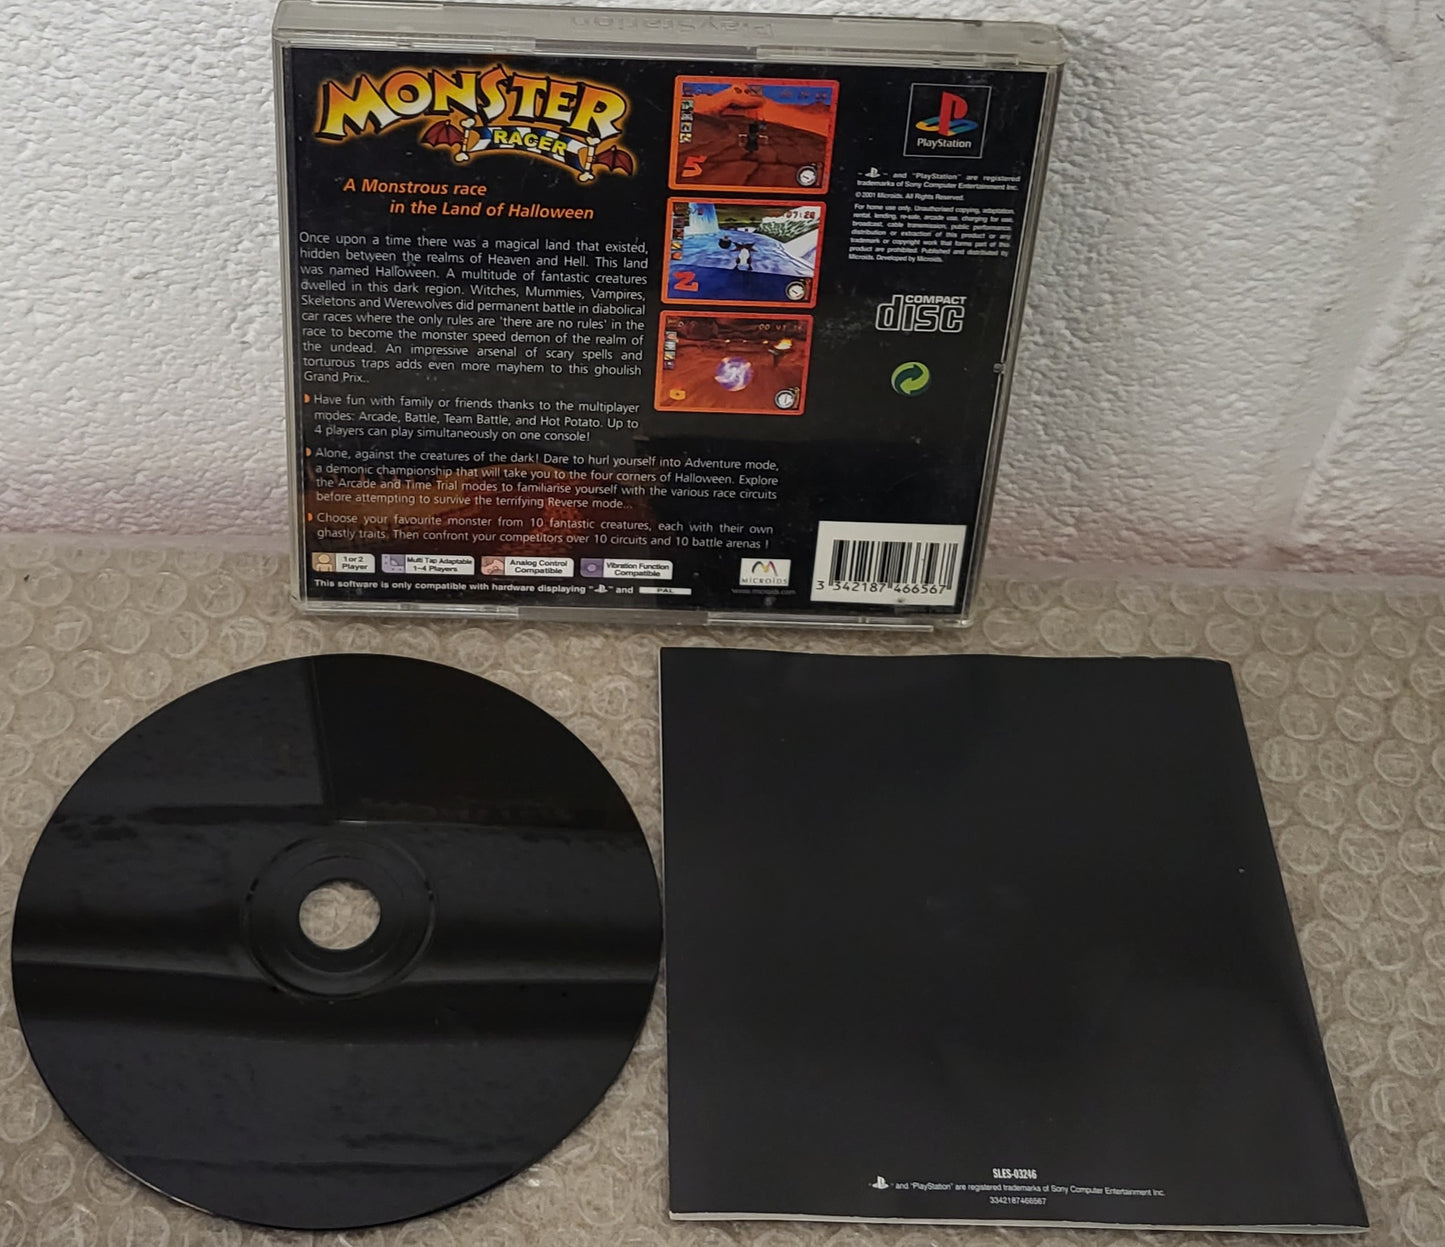 Monster Racer Sony Playstation 1 (PS1) Game